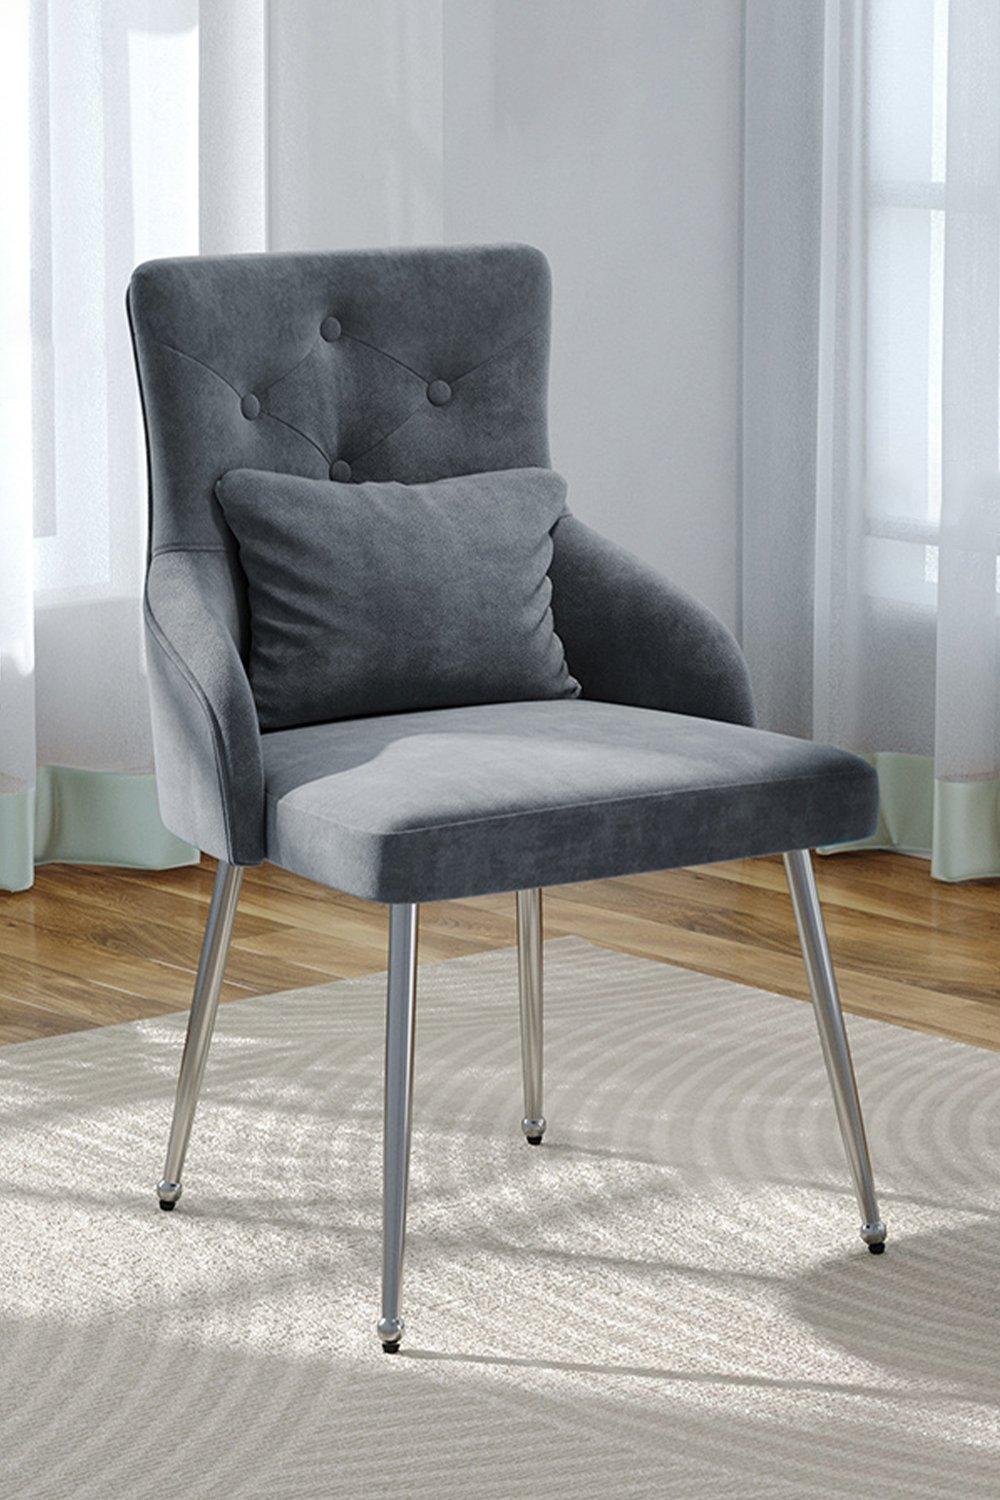 Velvet Tufted Dining Chair with Cushion